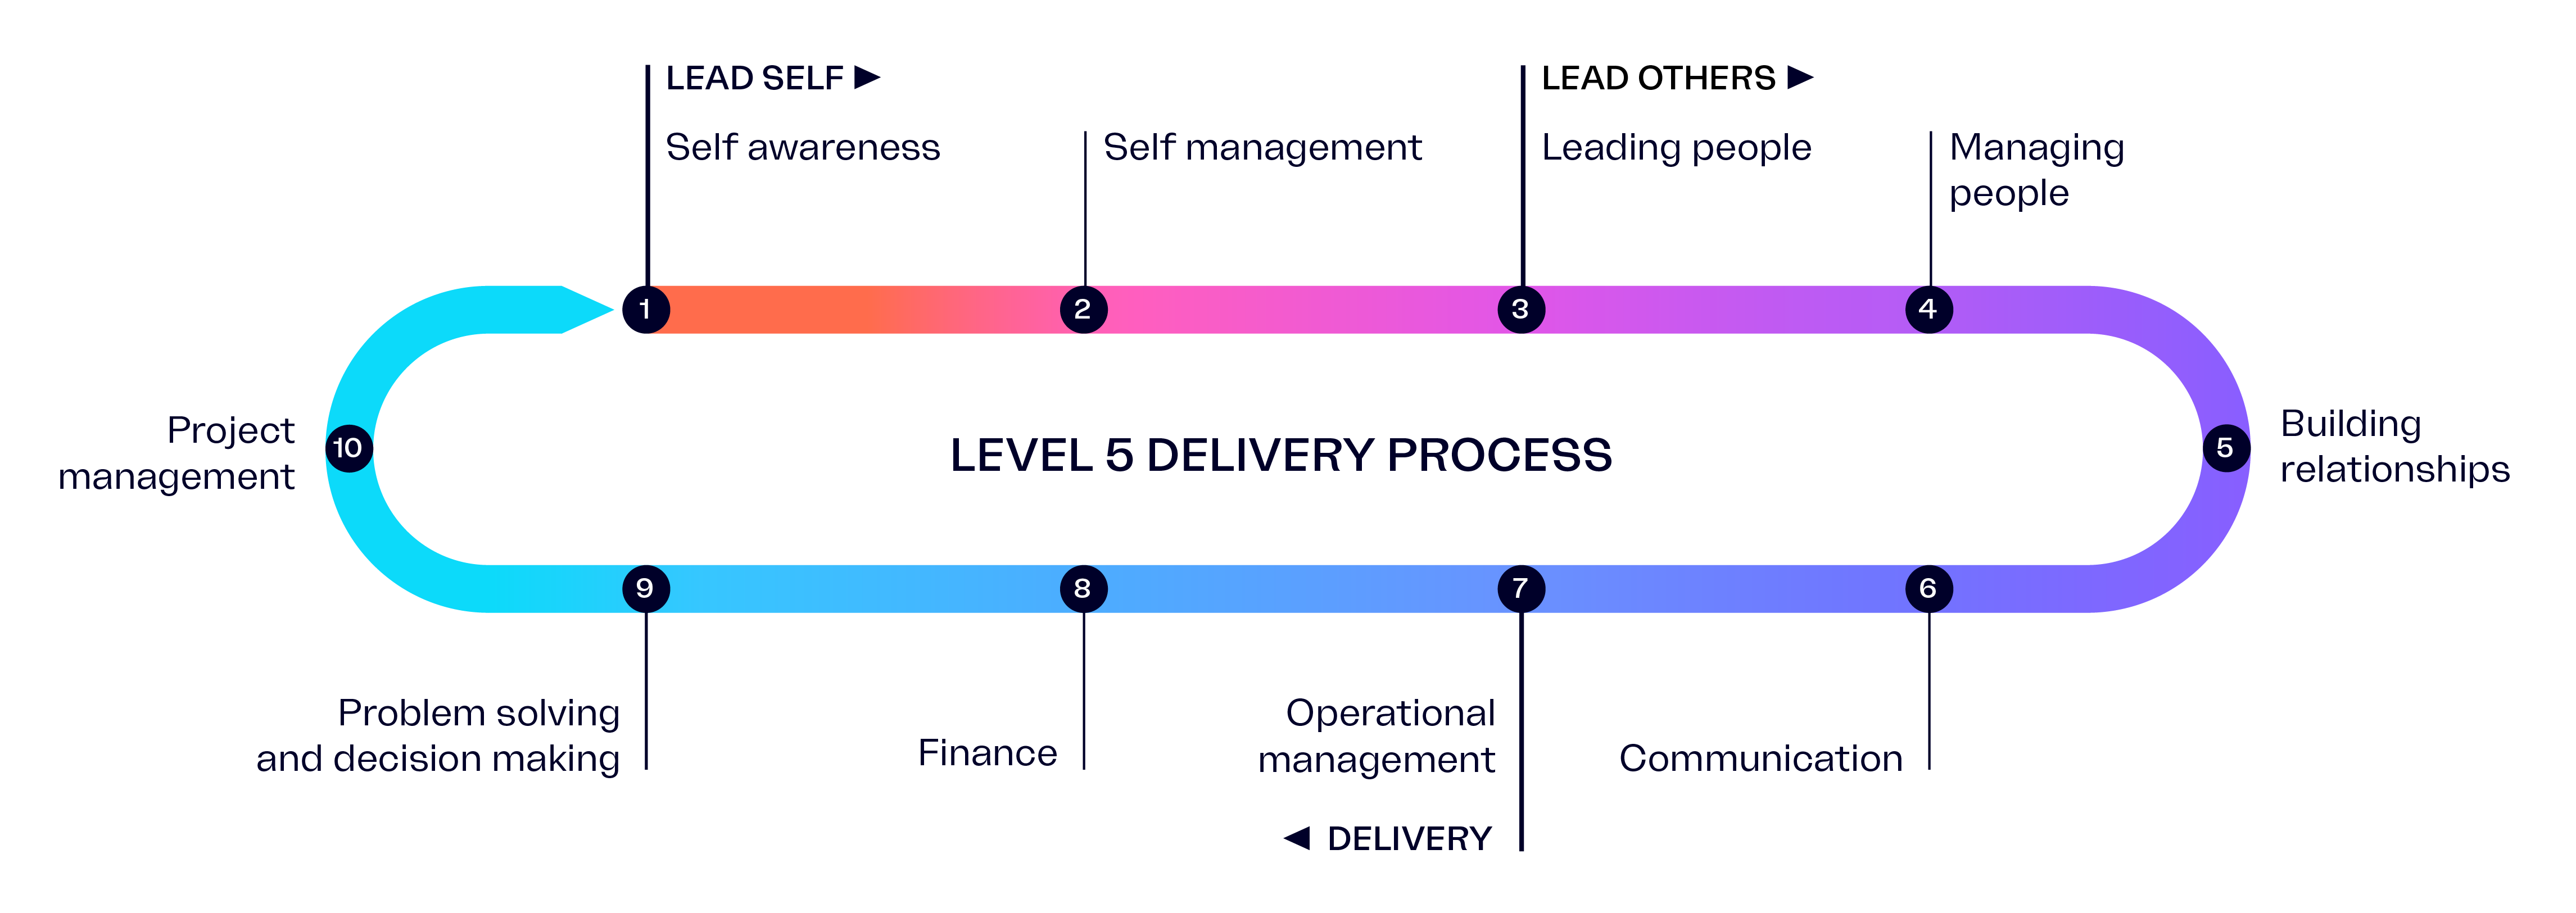 Delivery process for a L5 Management Apprentice illustrated as an oval with regular workshops.